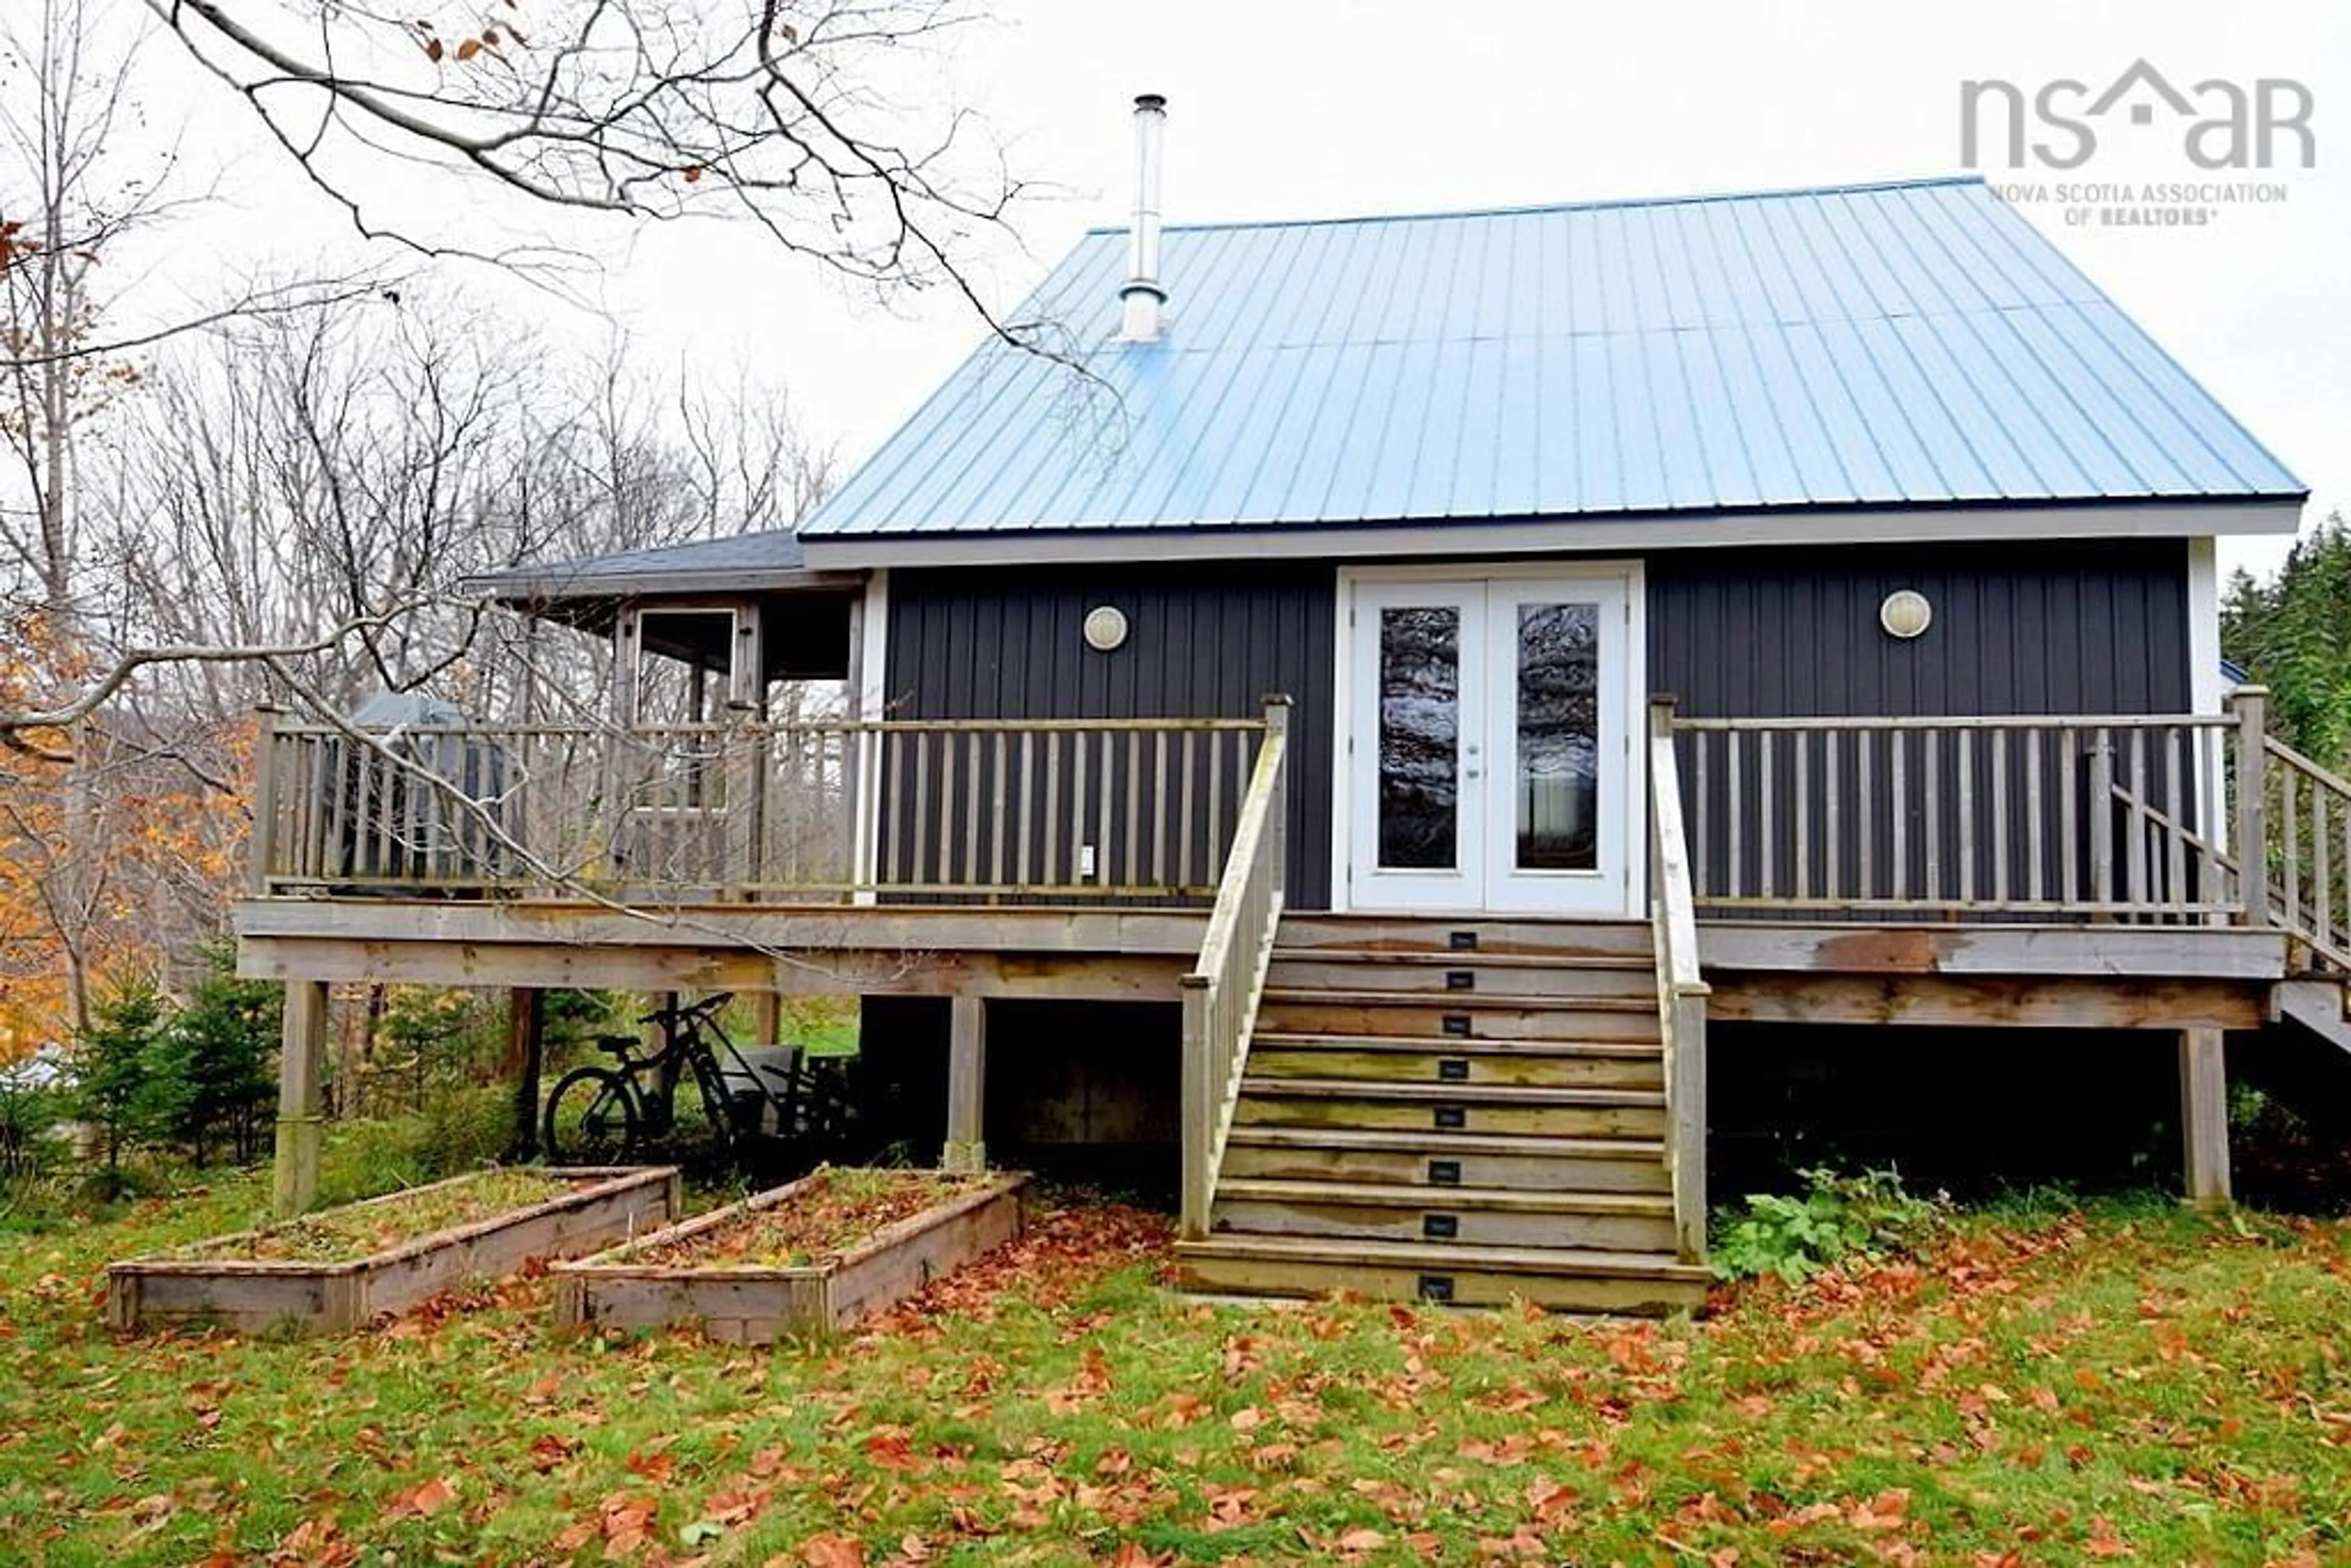 Cottage for 664 South West Margaree Rd, South West Margaree Nova Scotia B0E 3H0